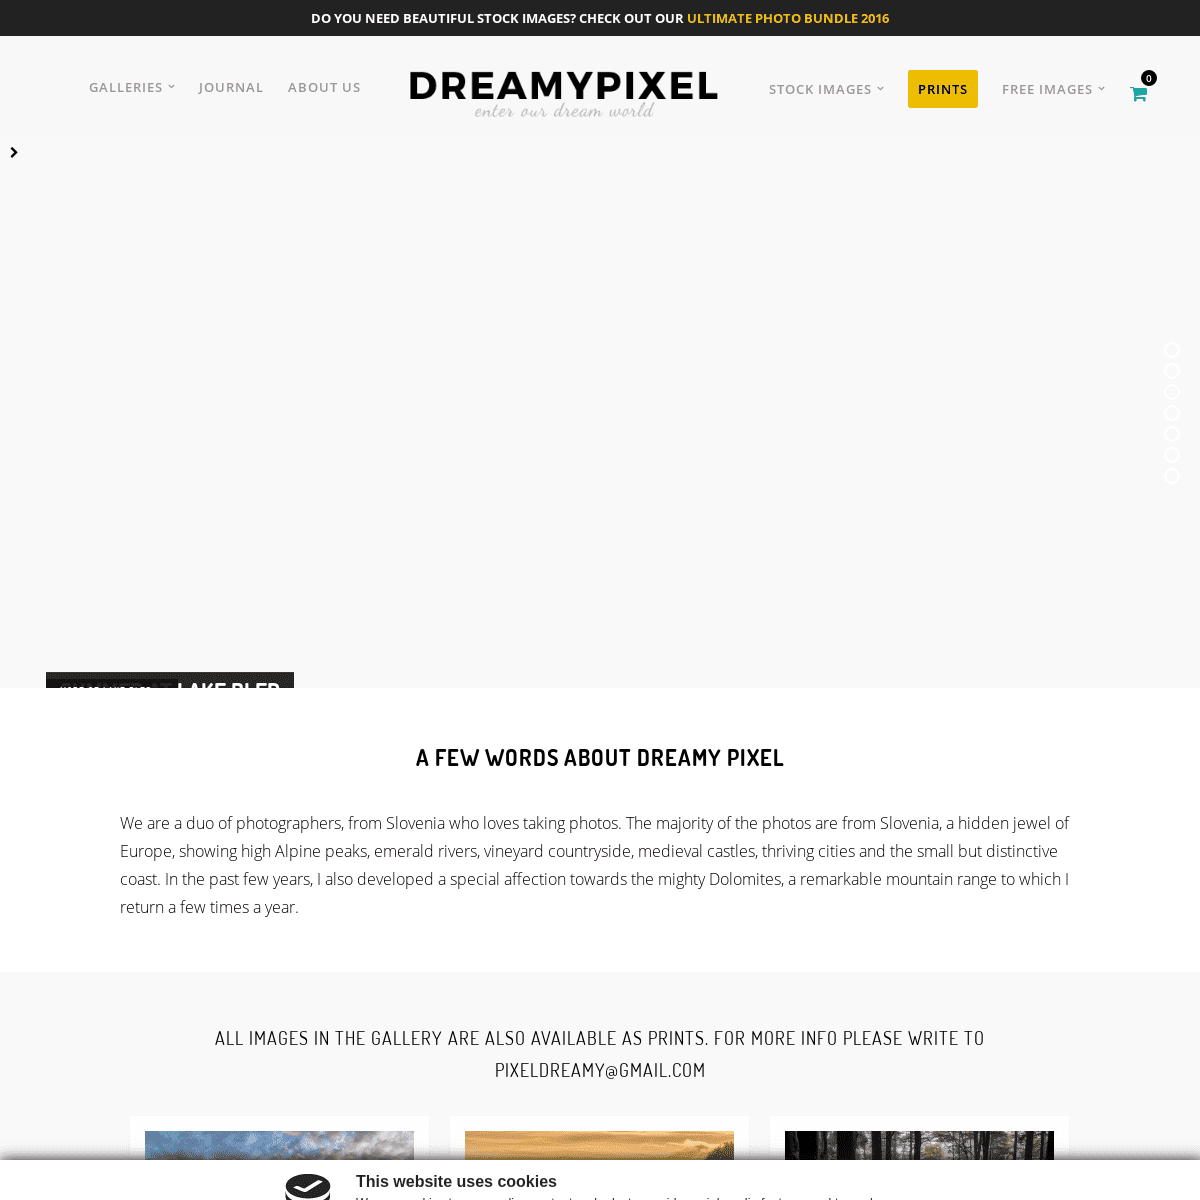 A complete backup of https://dreamypixel.com